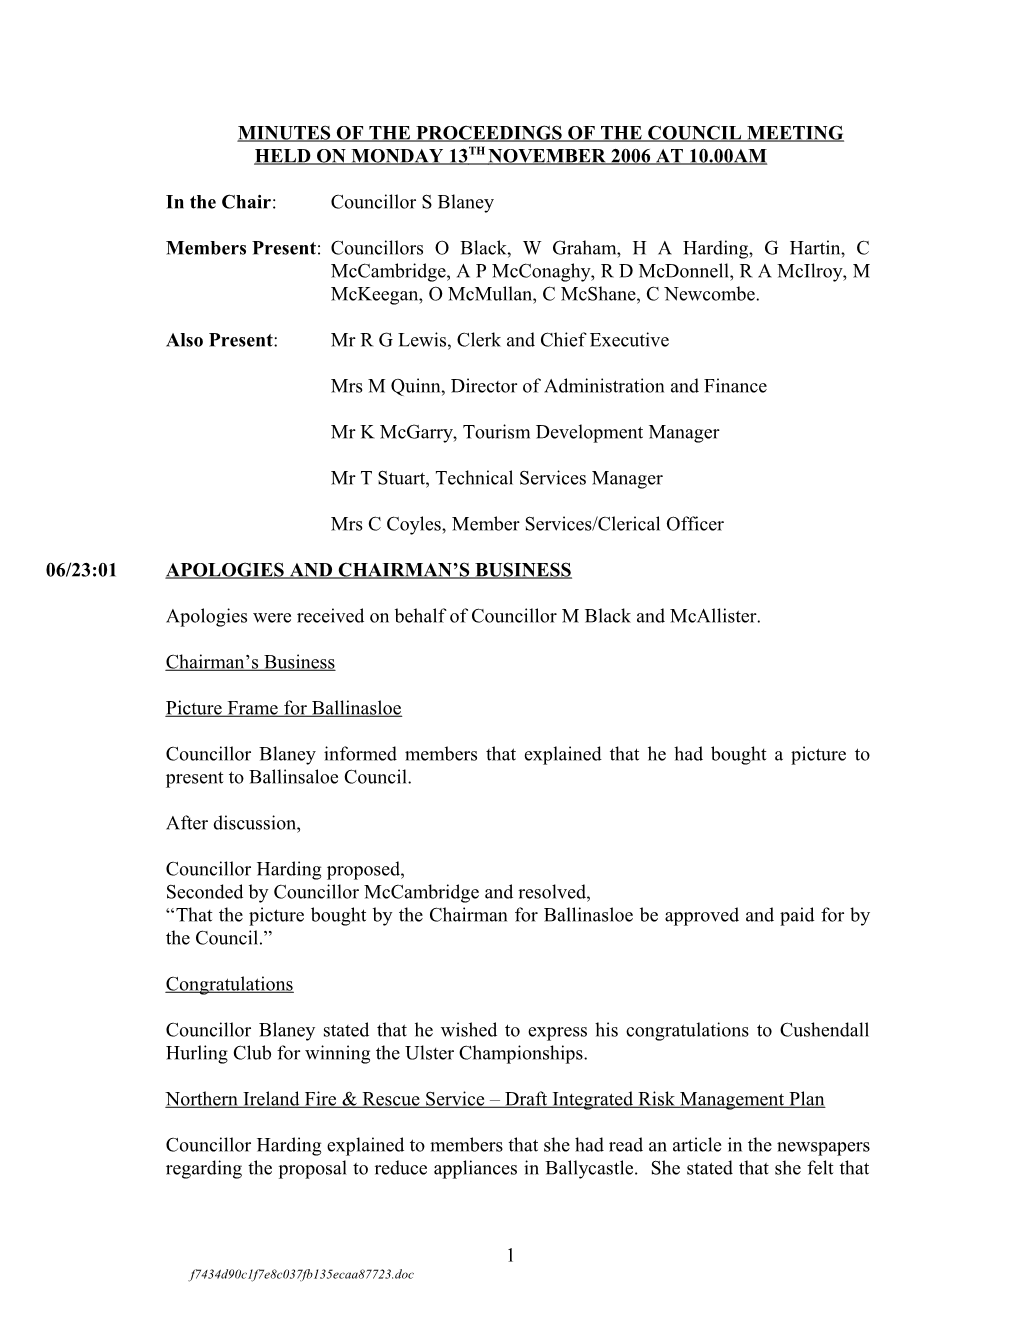 Minutes of the Proceedings of the Council Meeting Held s5